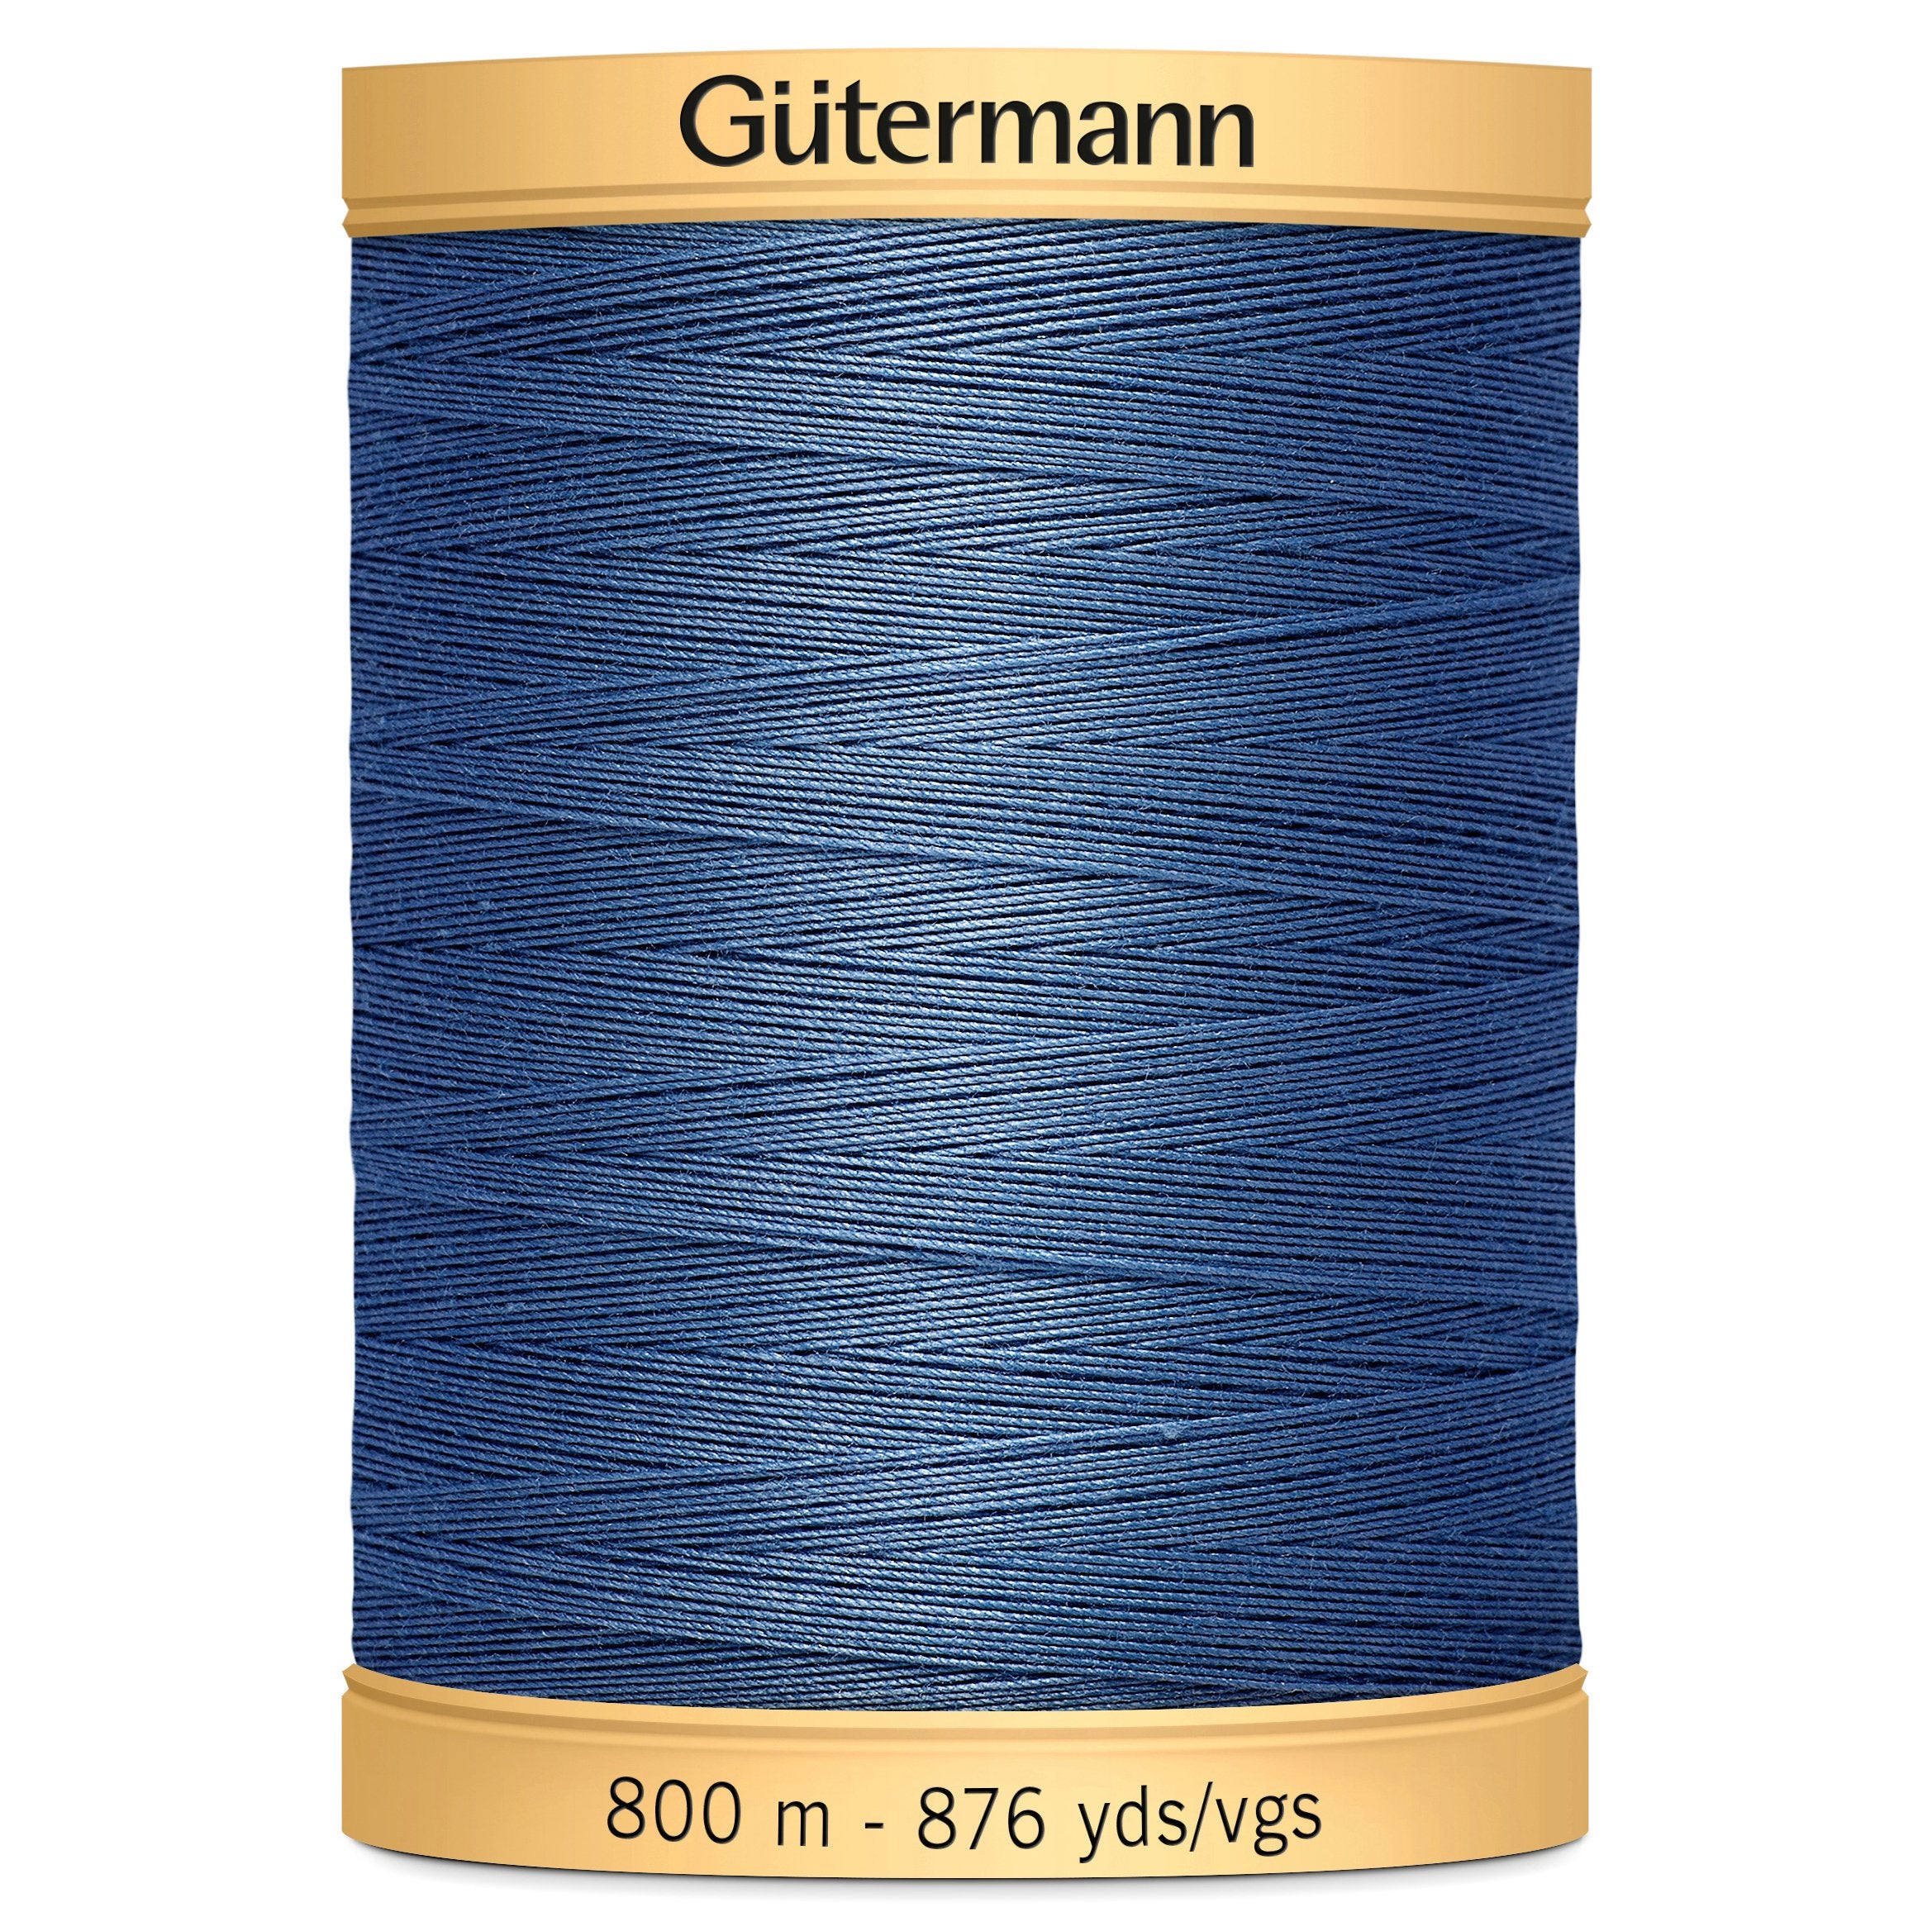 Gutermann Natural Cotton - 5624 from Jaycotts Sewing Supplies